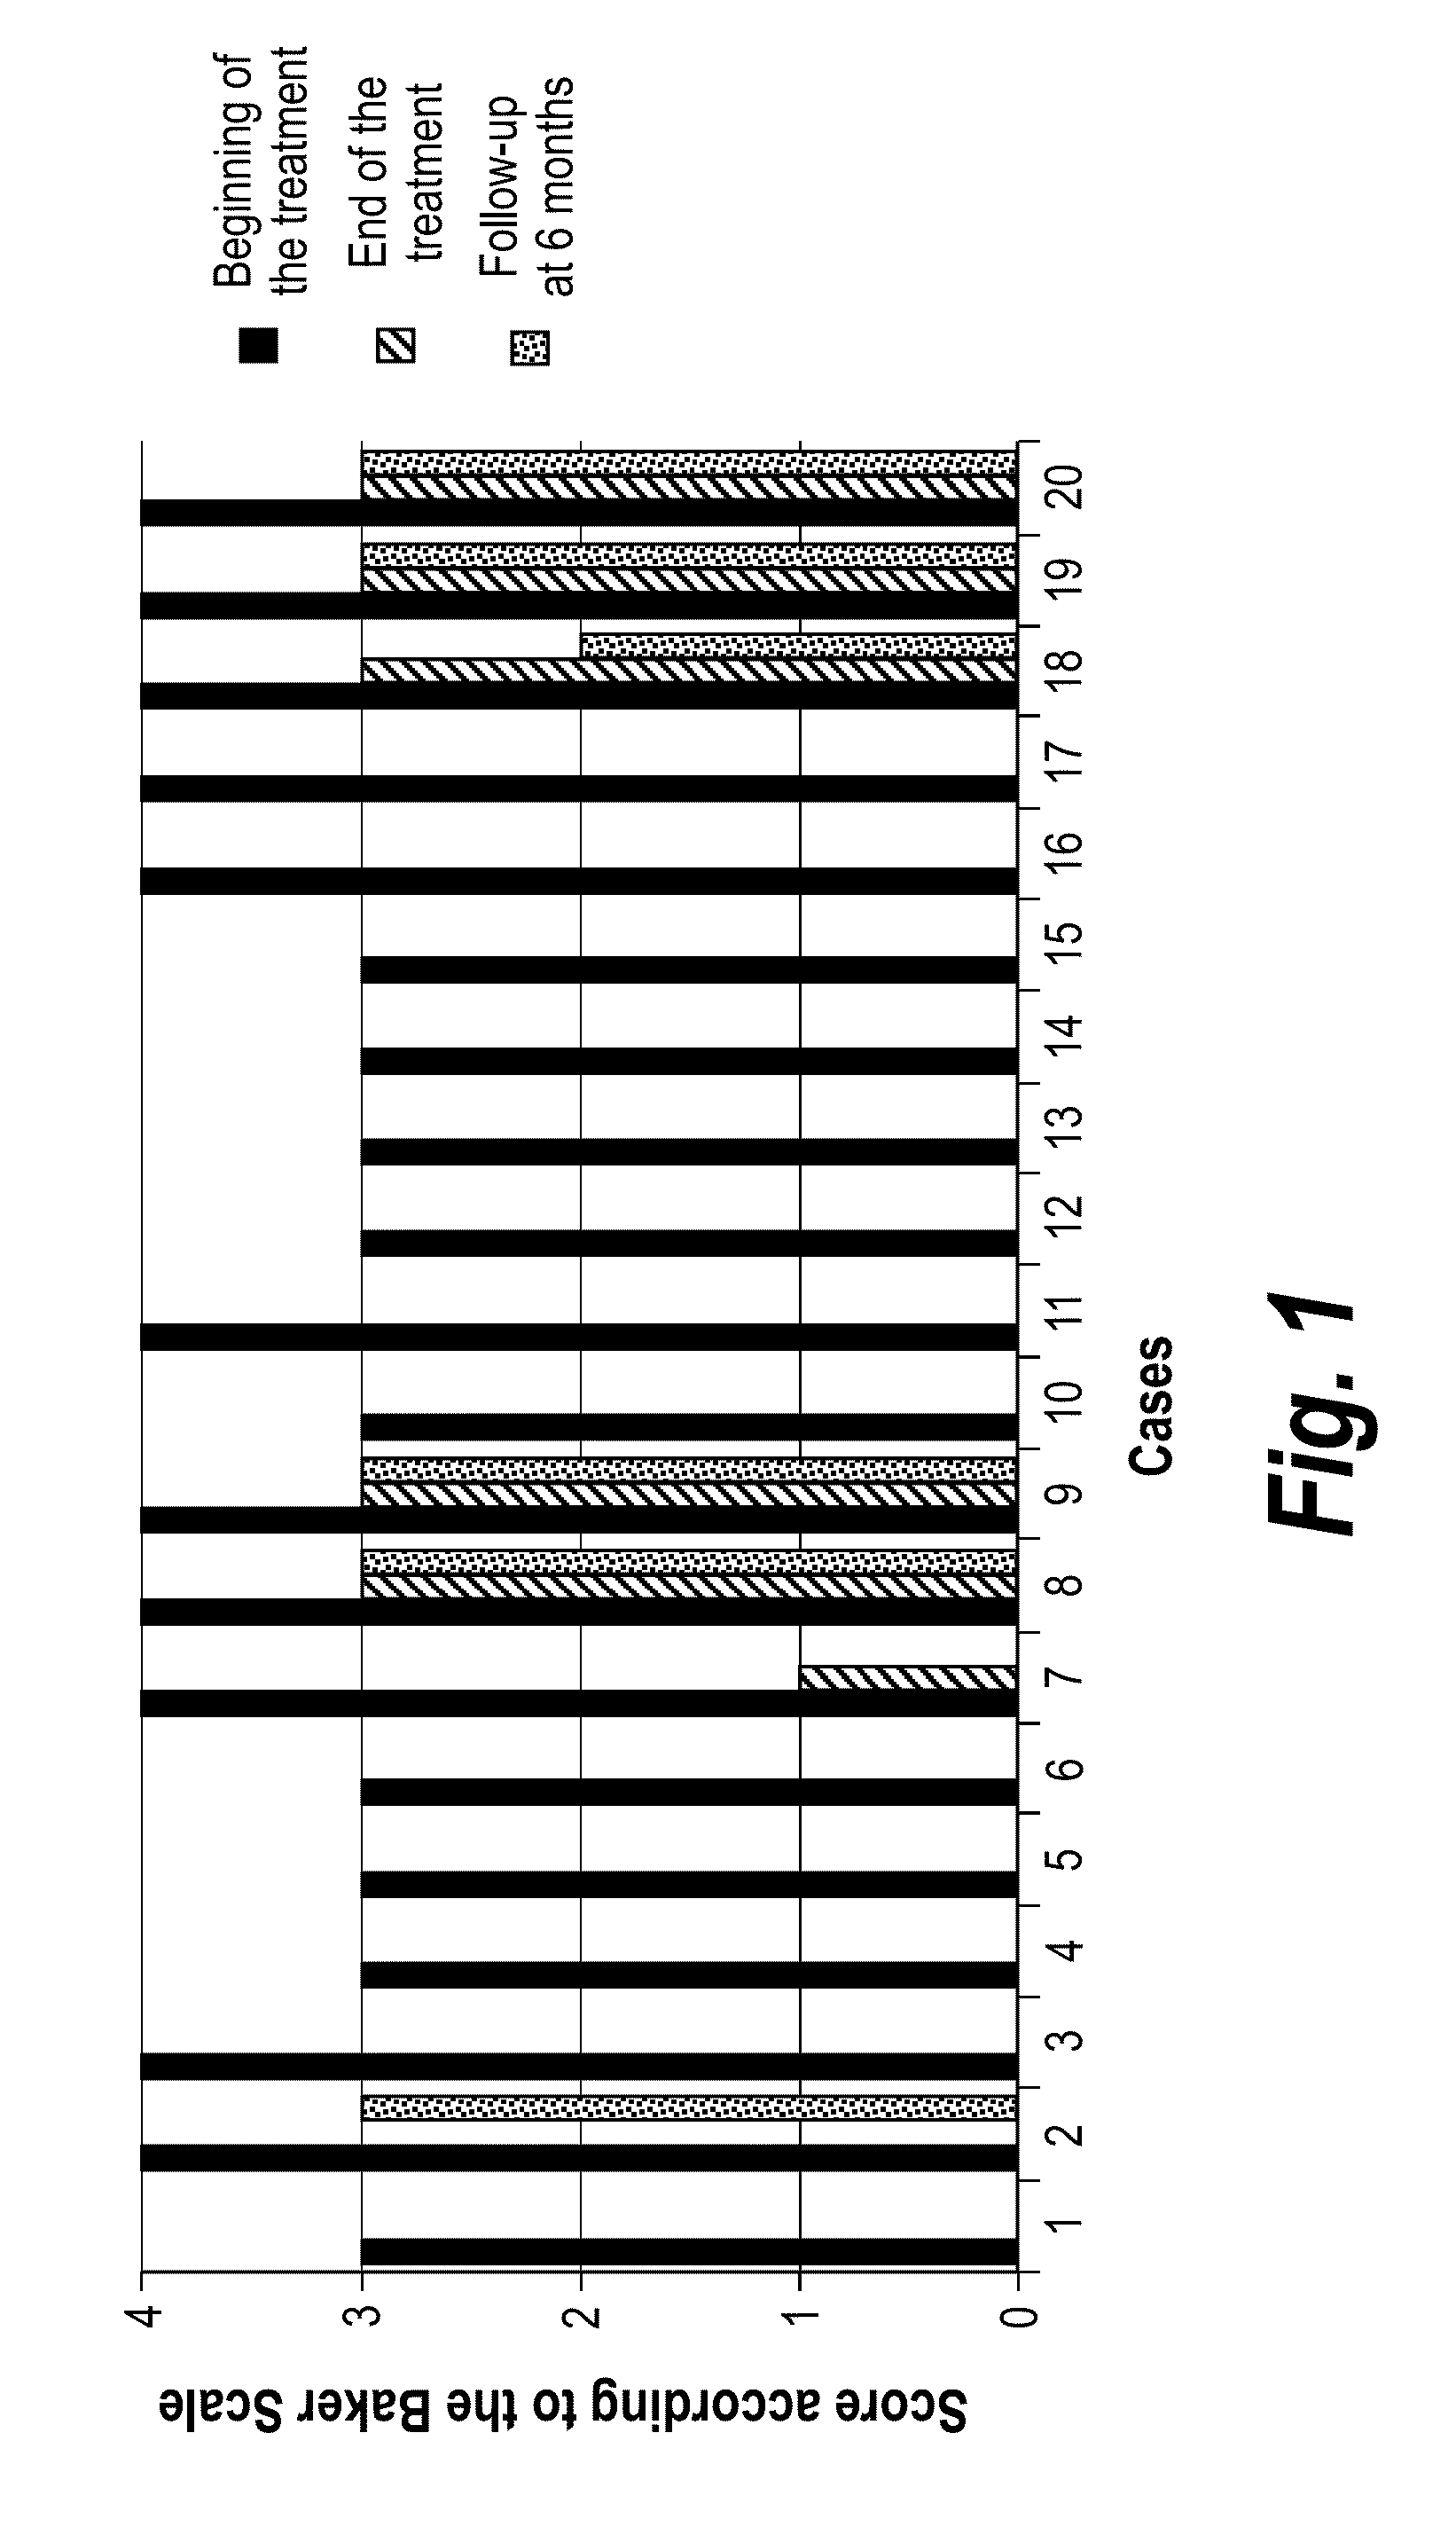 Pharmaceutical composition containing pirfenidone in sustained-release tablet form